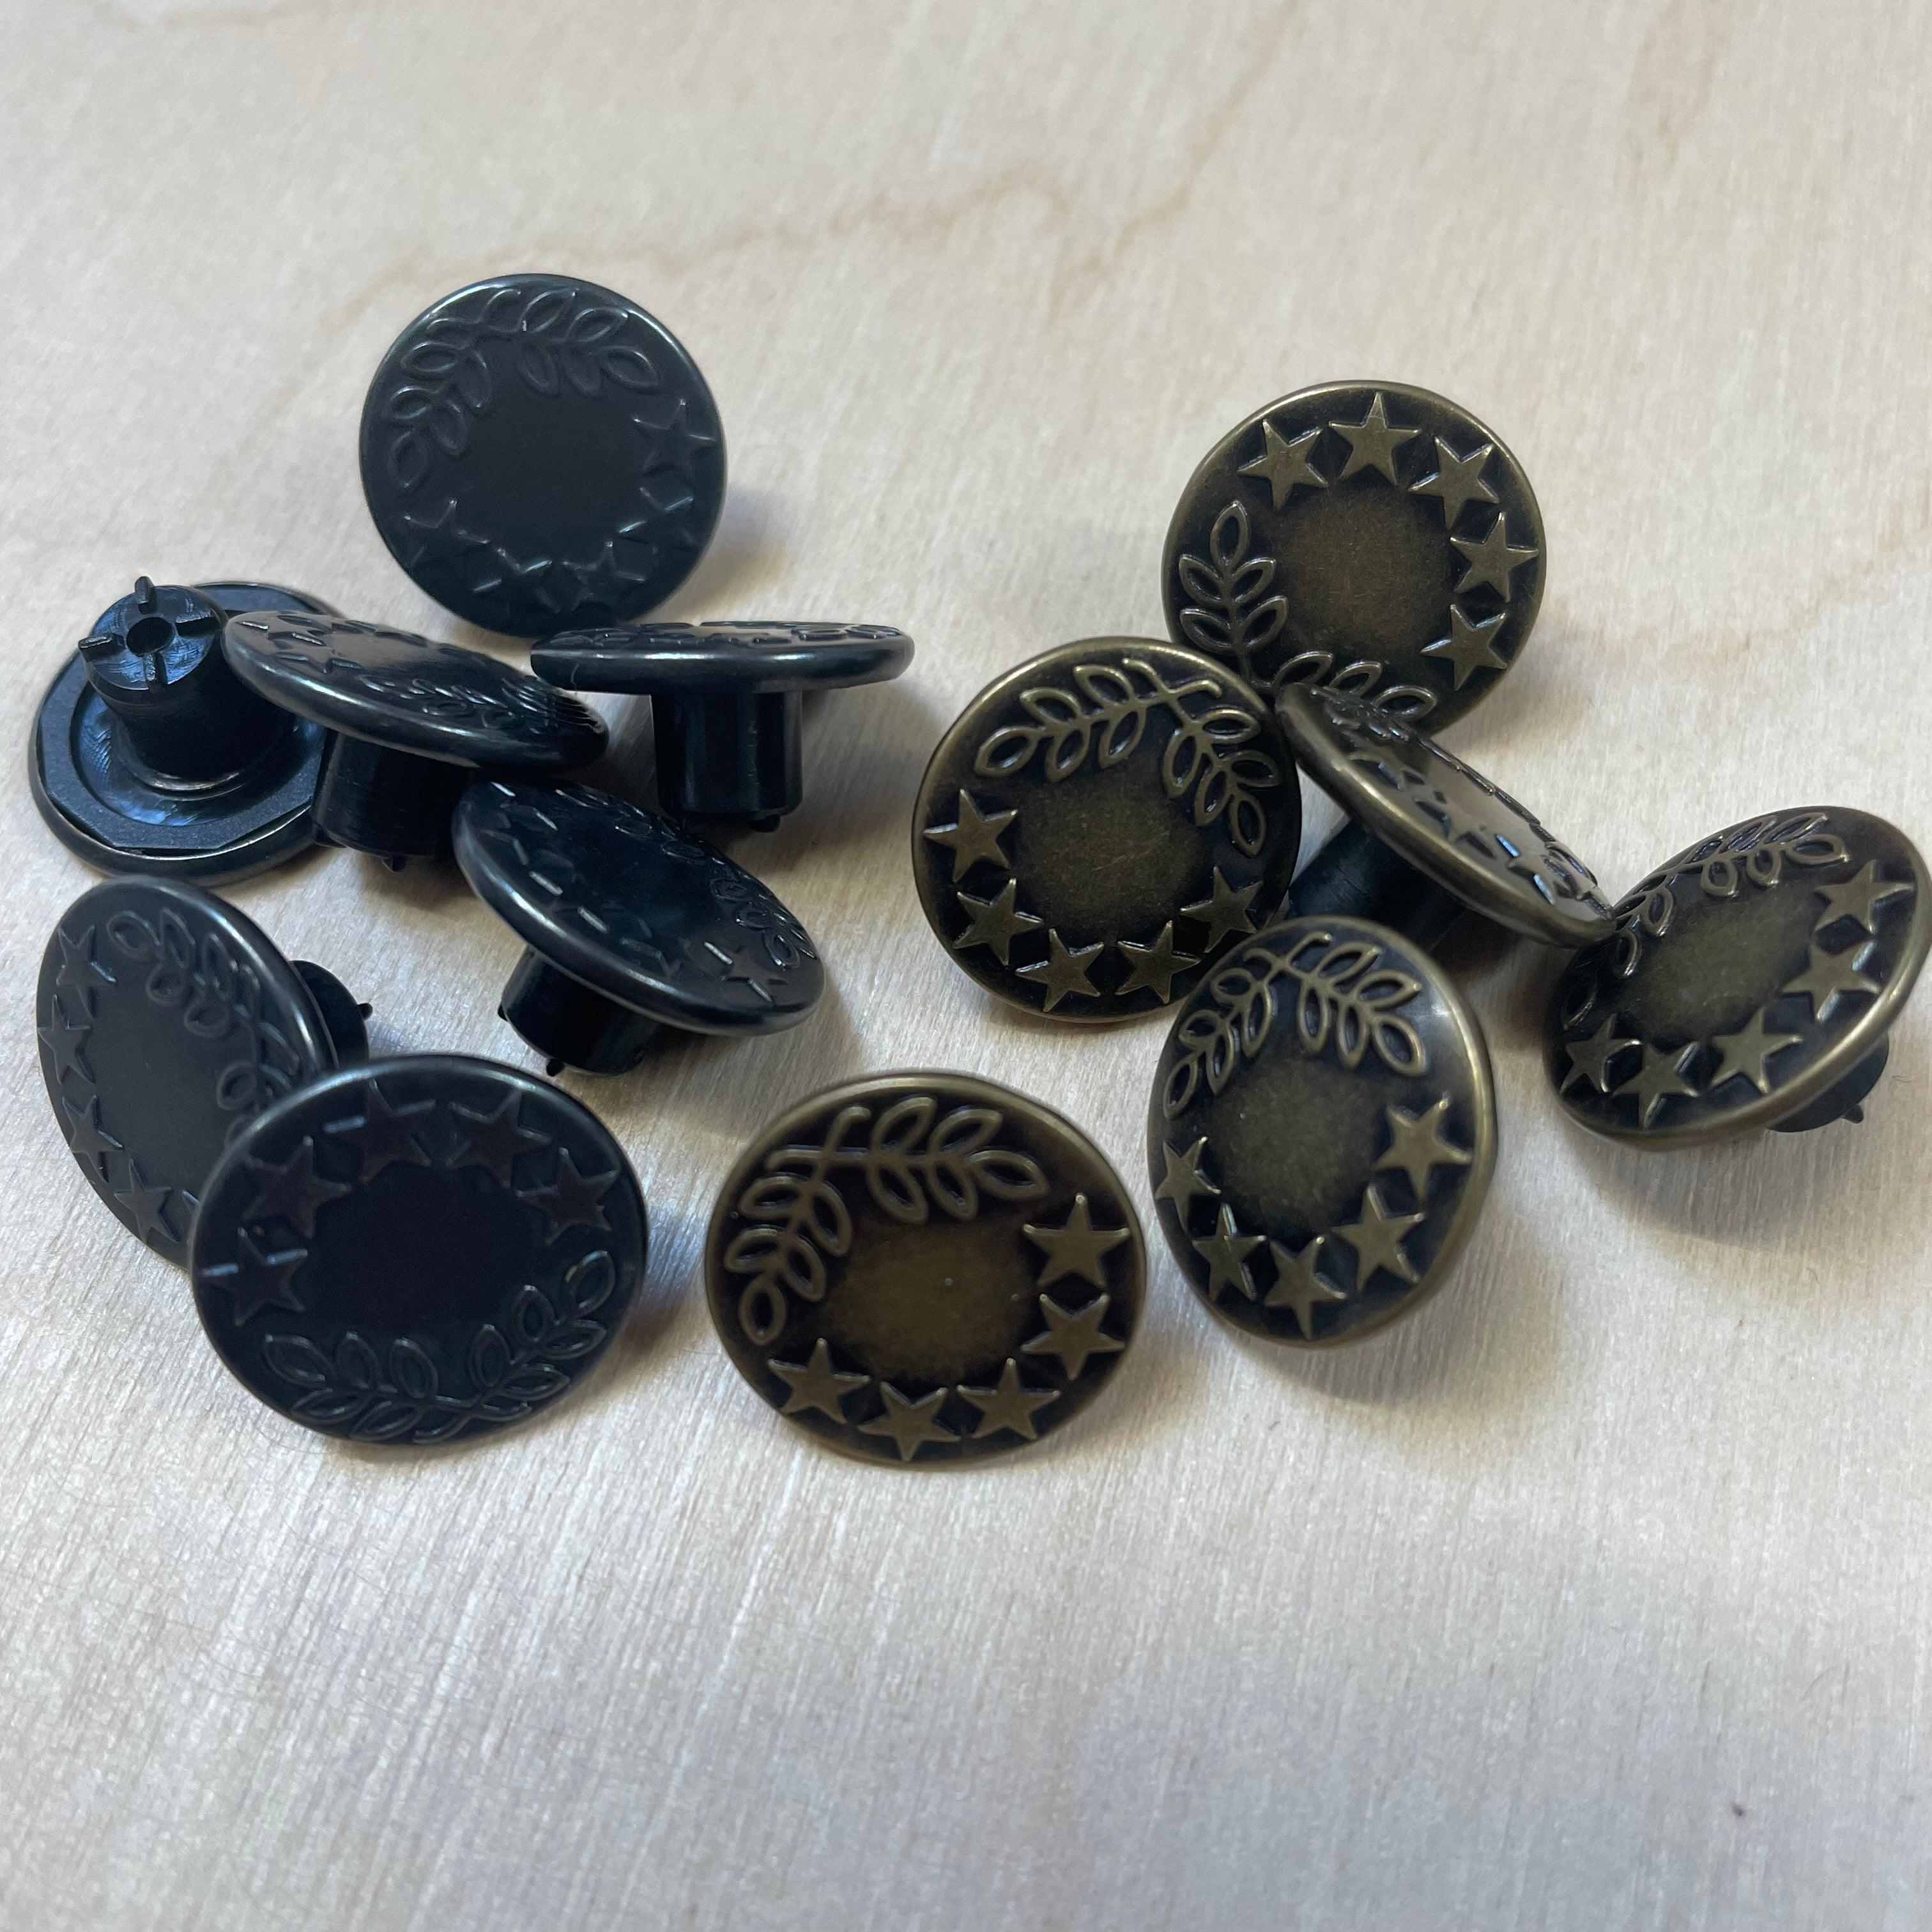 17mm Jeans Buttons